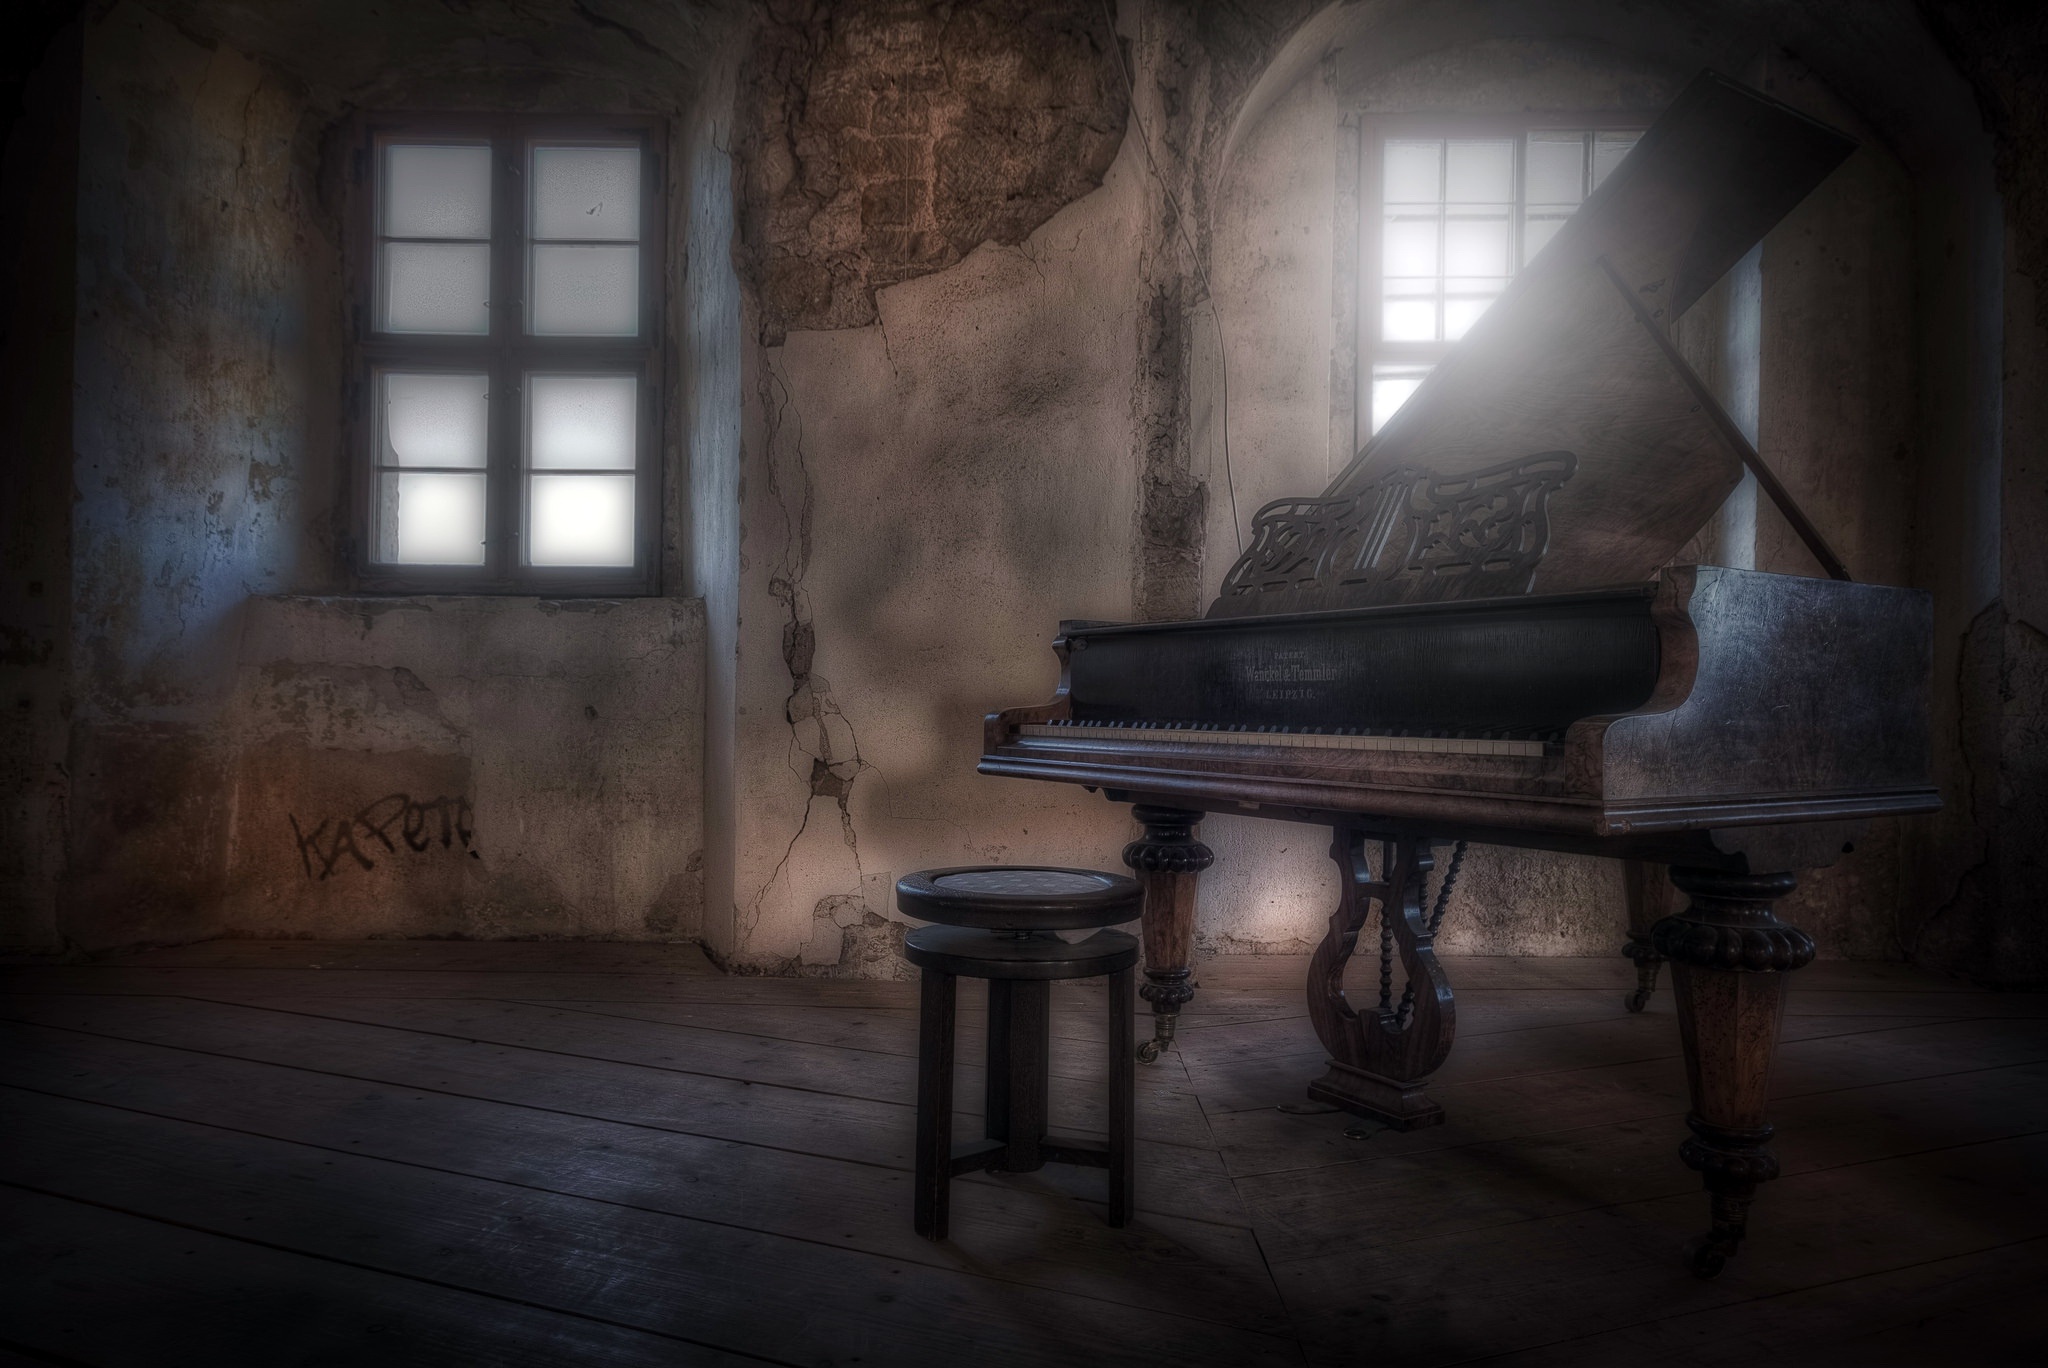 Lovely Piano in Old, Abandoned Building